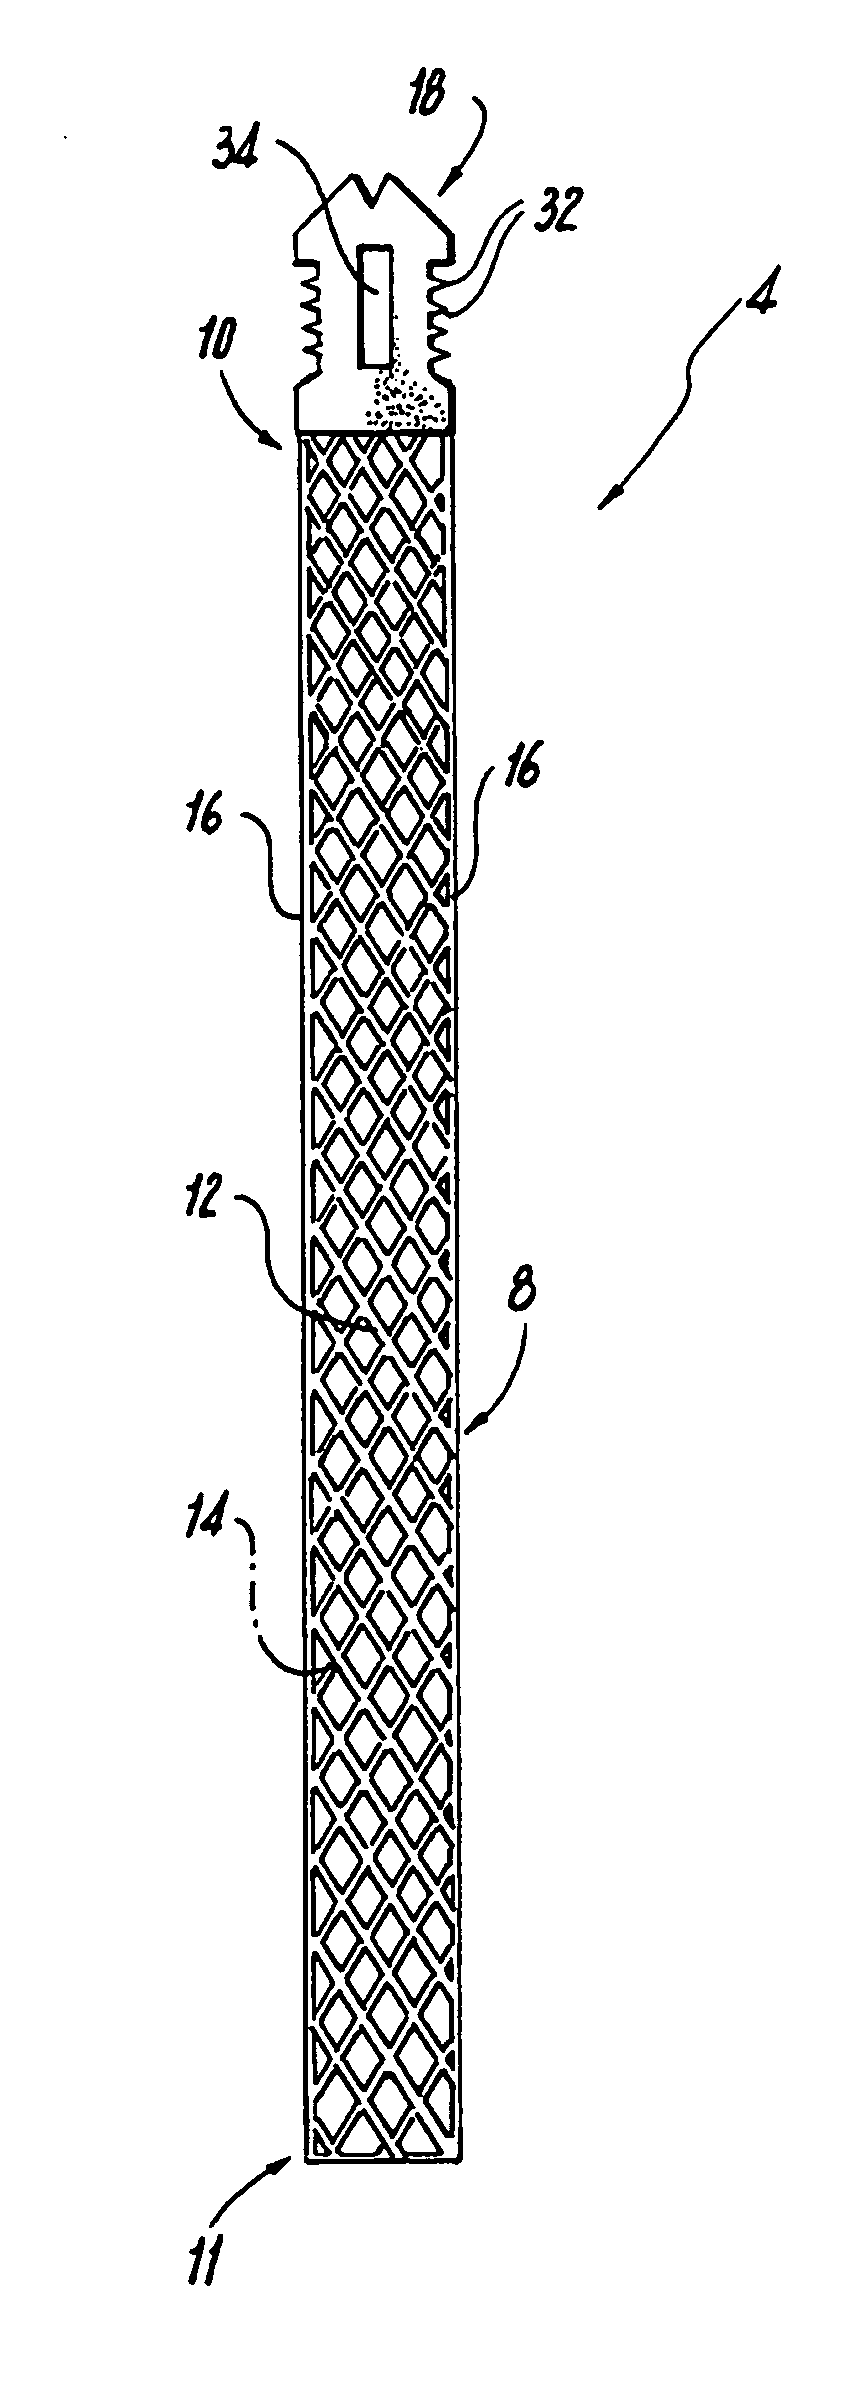 Self-anchoring tissue lifting device, method of manufacturing same and method of facial reconstructive surgery using same